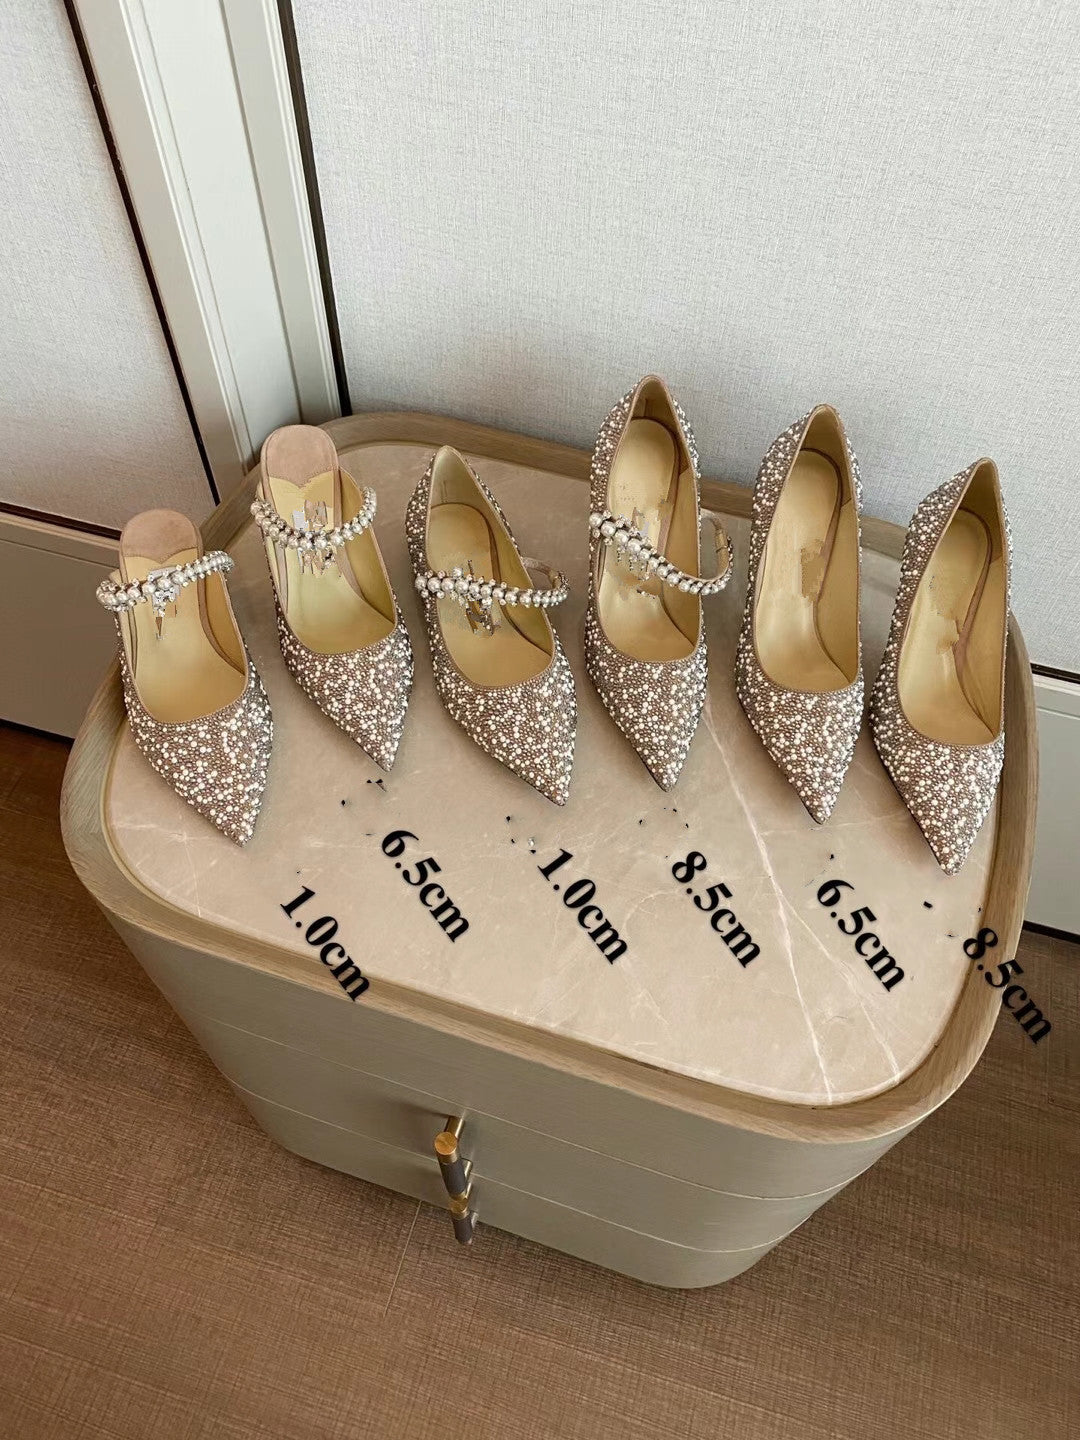 Pointed Shallow Mouth Rhinestones Pearl Flat High Heels Single Shoes Women